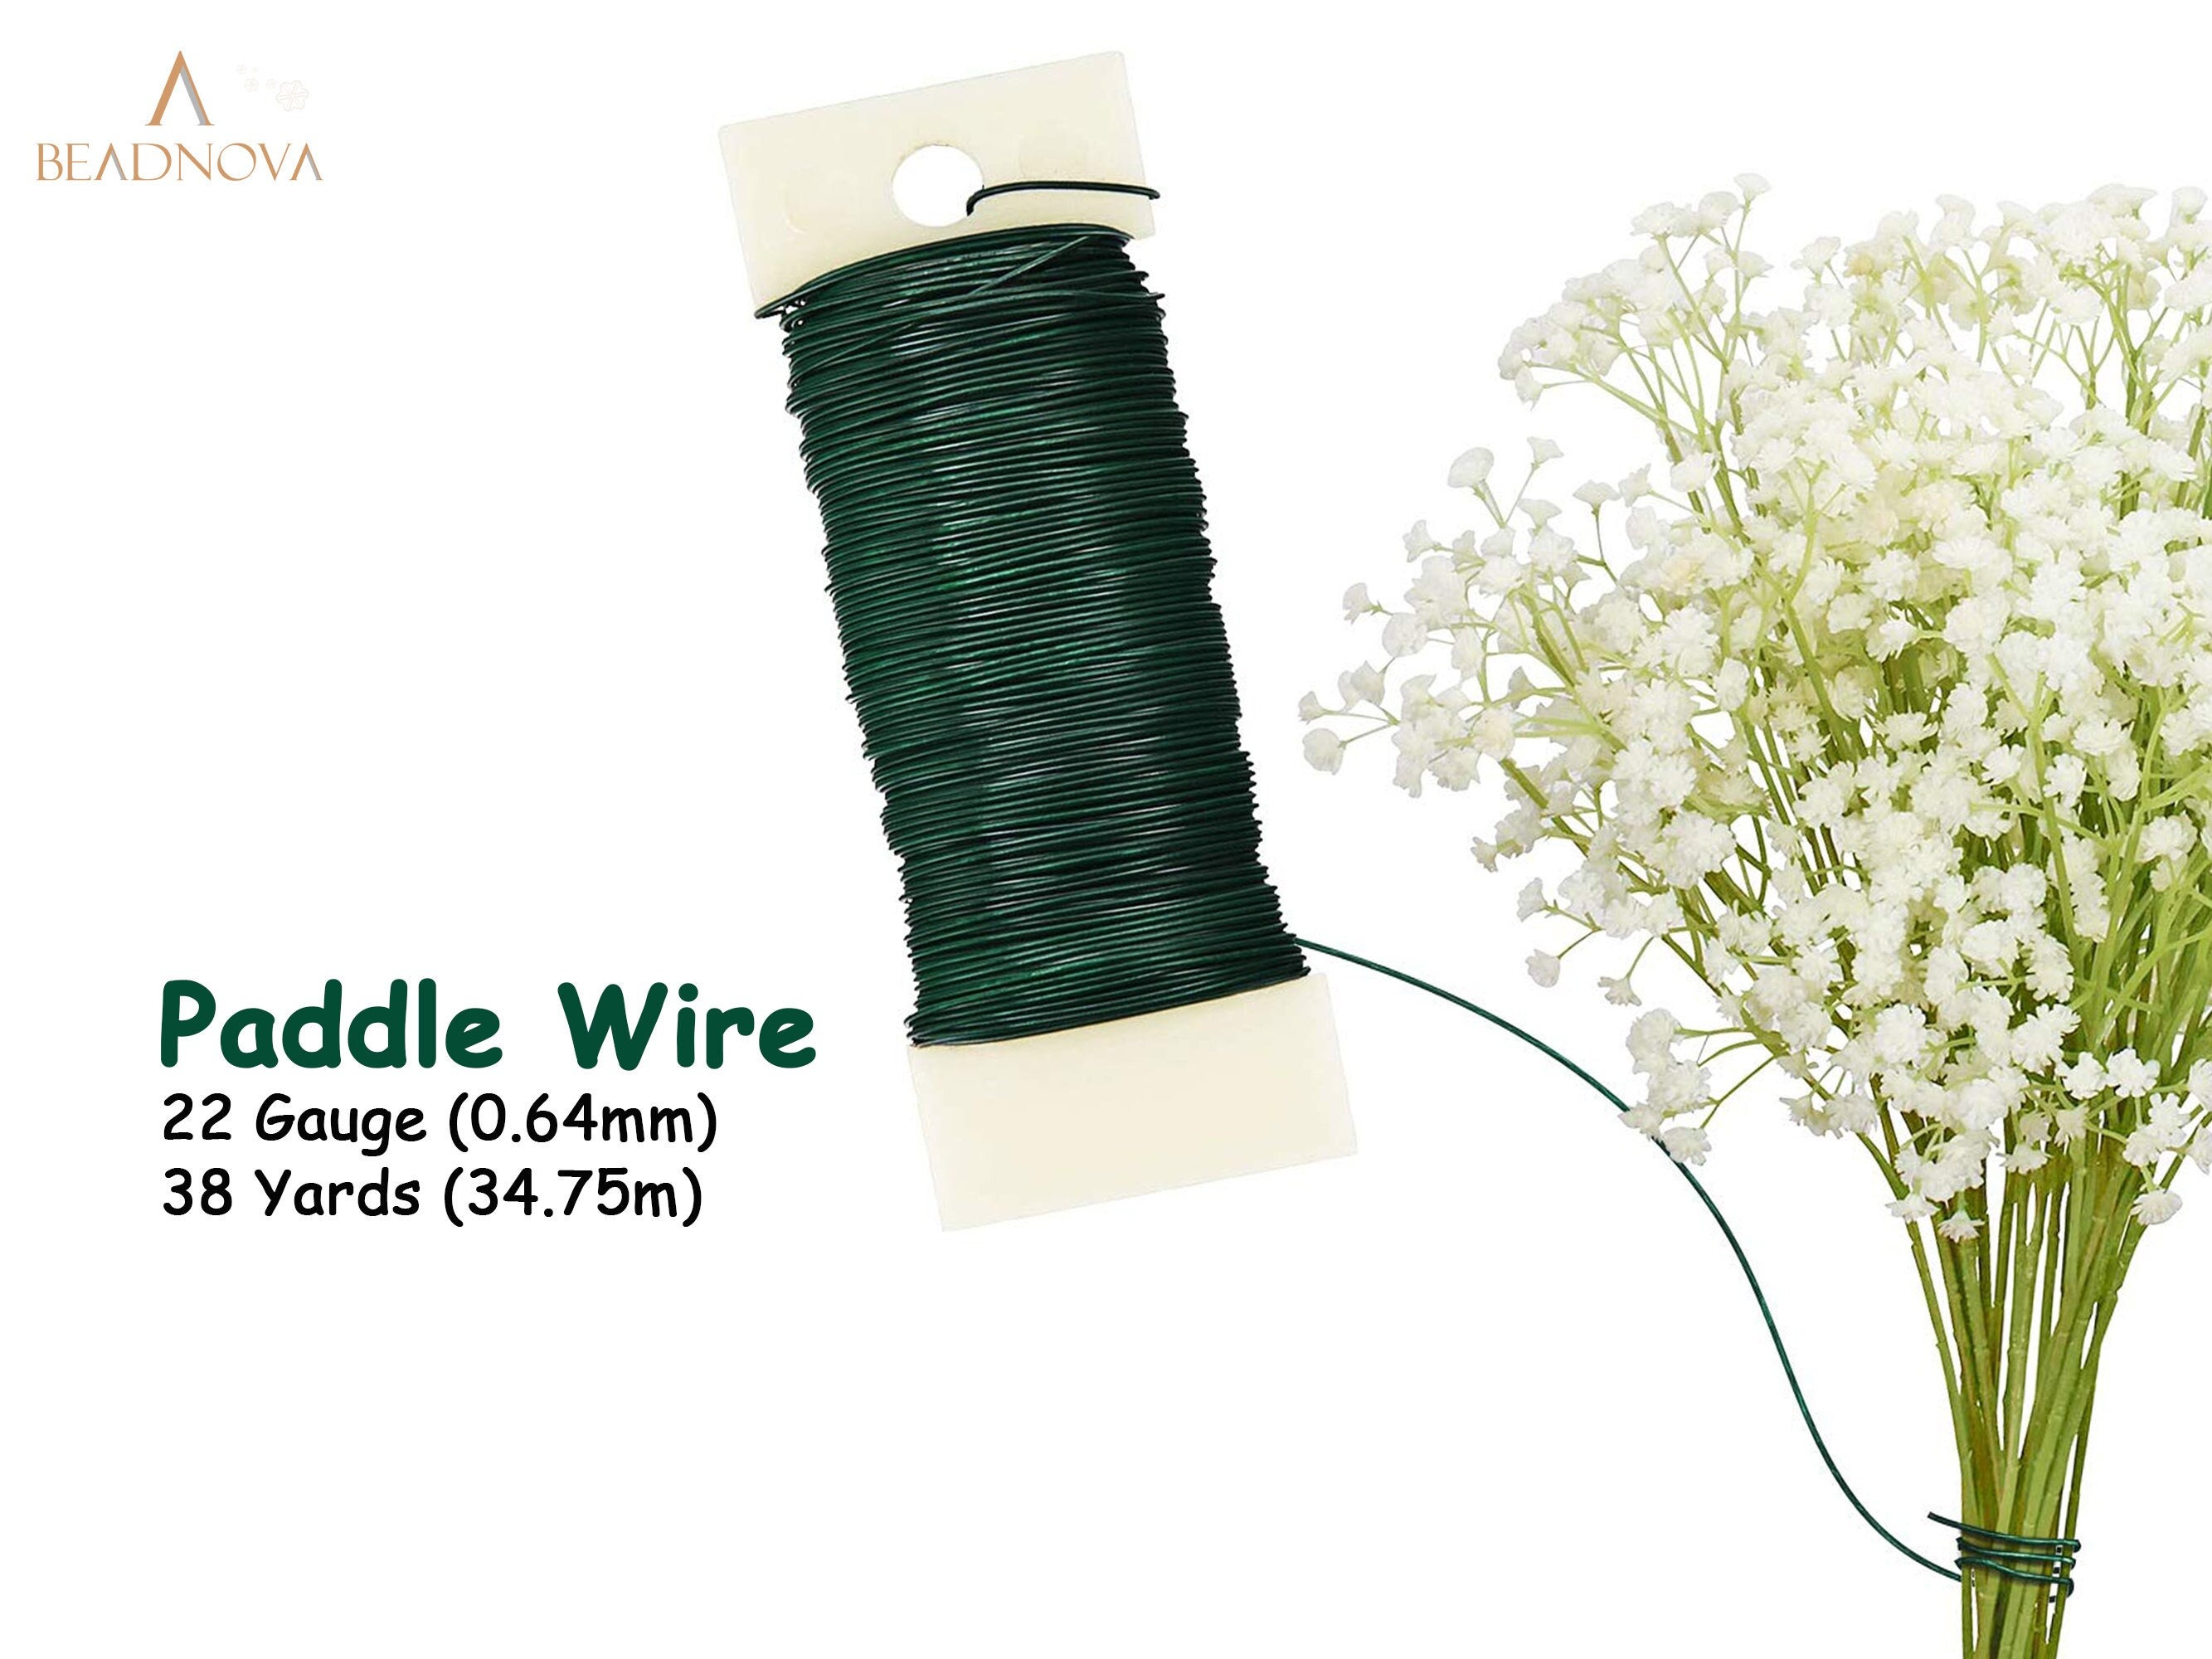 Covered Stem Wire Florist Paper covered stub Craft Silk Flower Wire 18